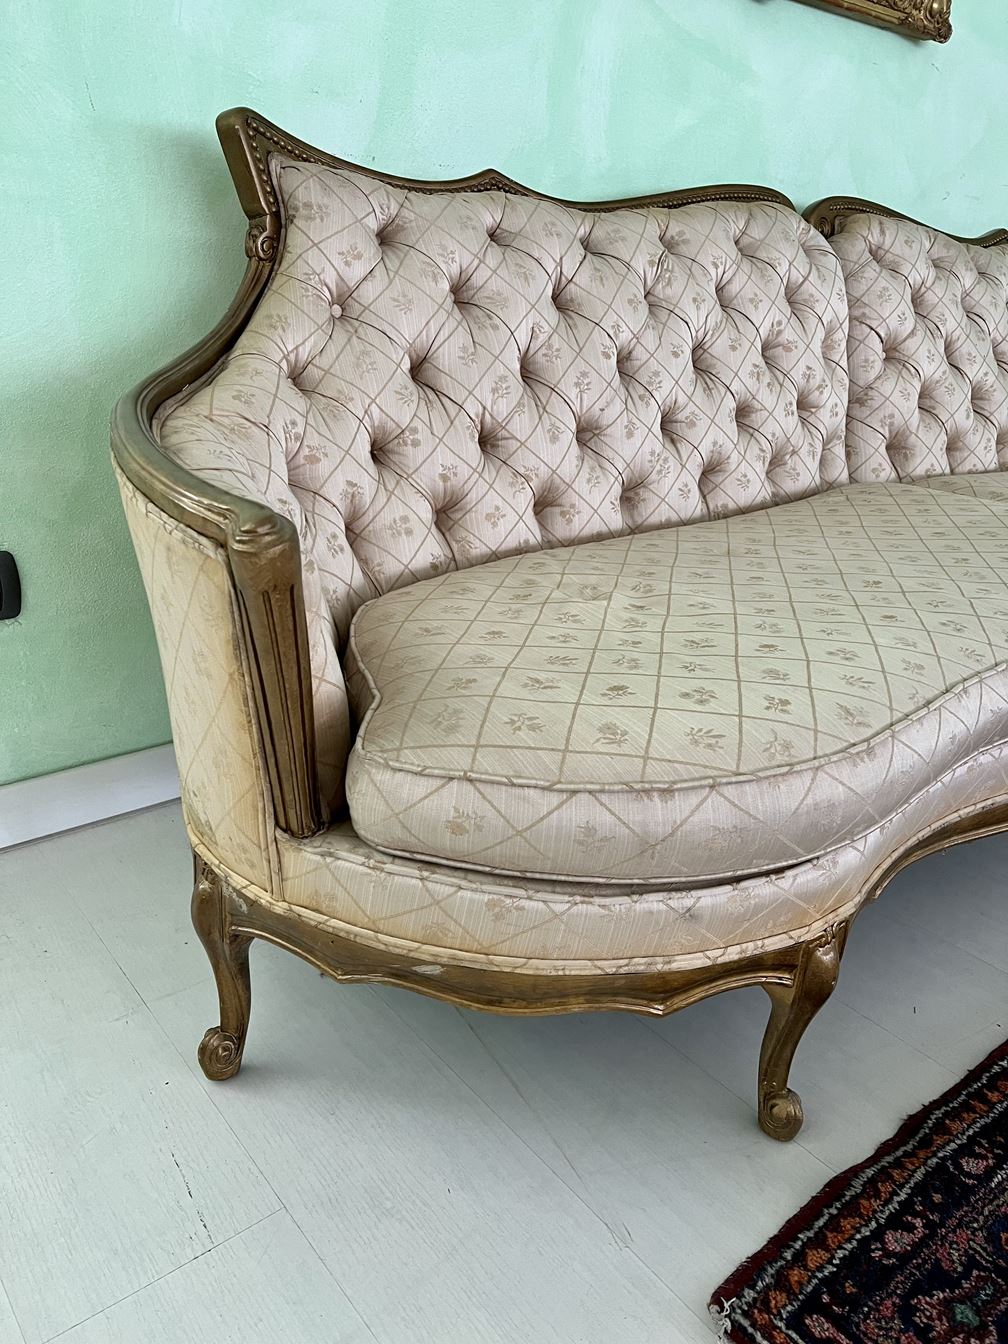 French sofa from the early 1900s